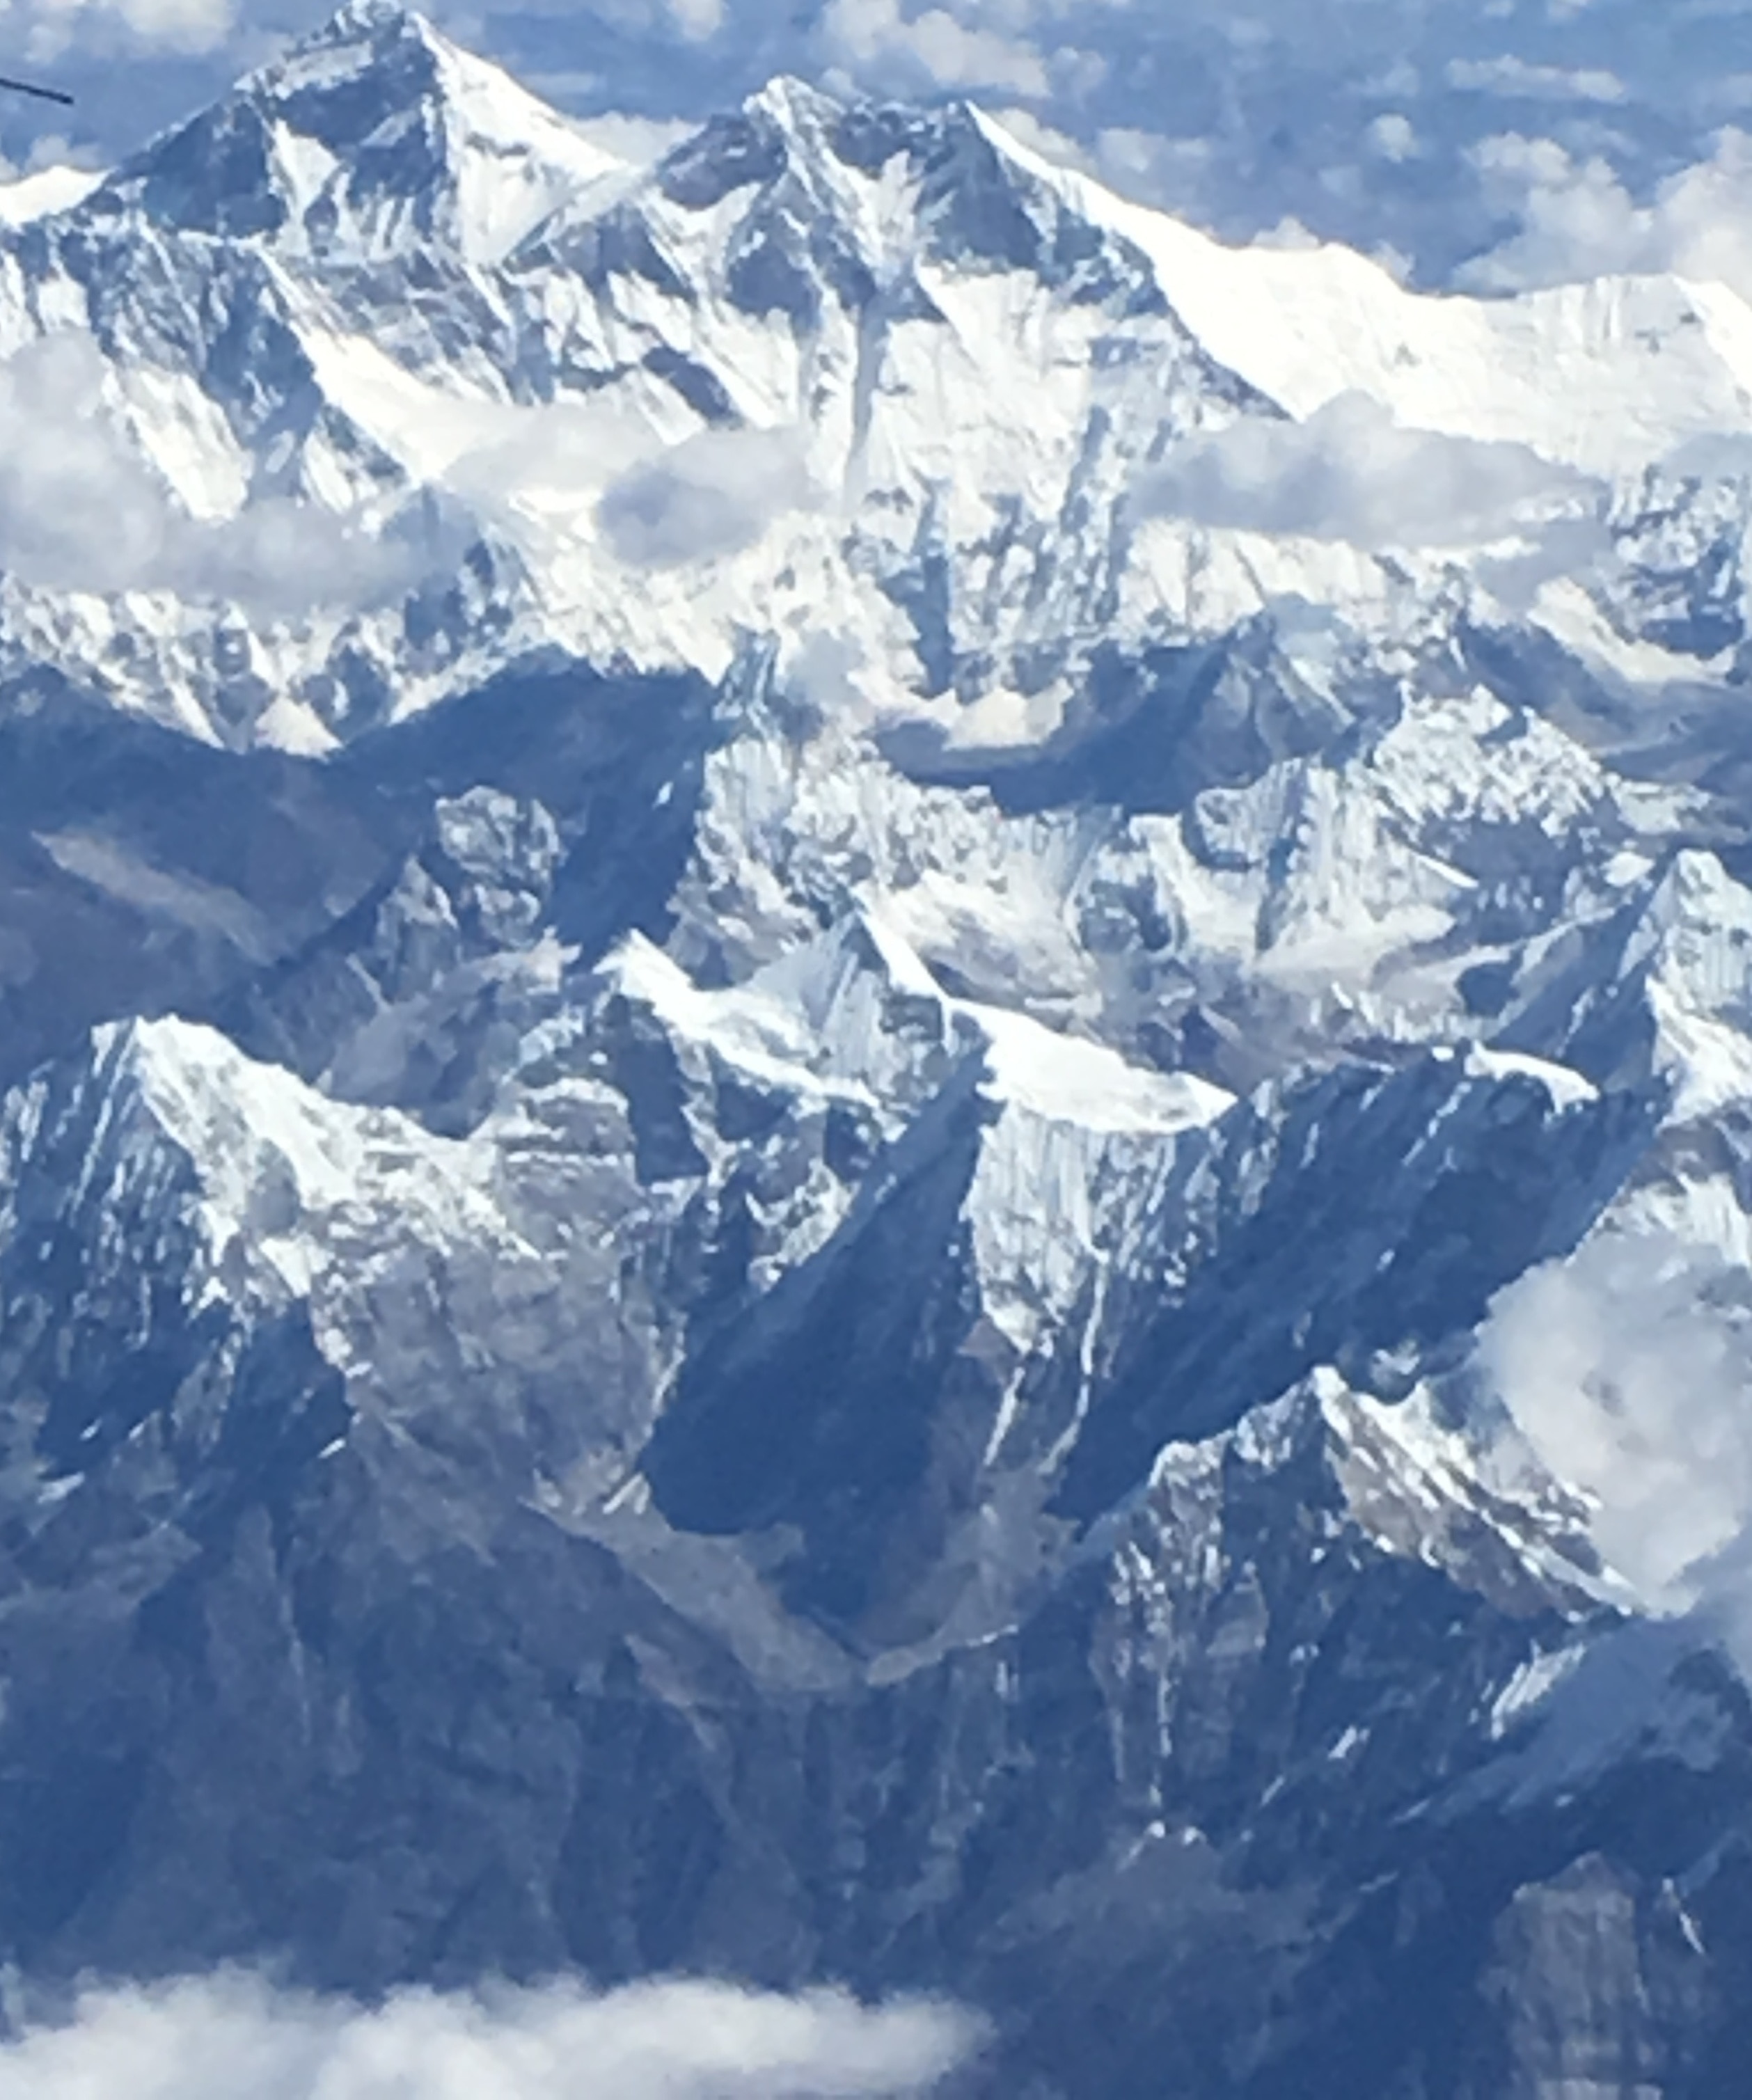 A great view of the mighty Mt. Everest can be taken from flight to Paro, Bhutan from New Delhi or Kathmandu.

Pro Tip- Please make sure you are sitting at the right side of the plane to get the clear view of the Himalayan ranges. 
When you fly into Bhutan its on the left window side while flying out of Bhutan its of course the right window side.
#AboveItAll